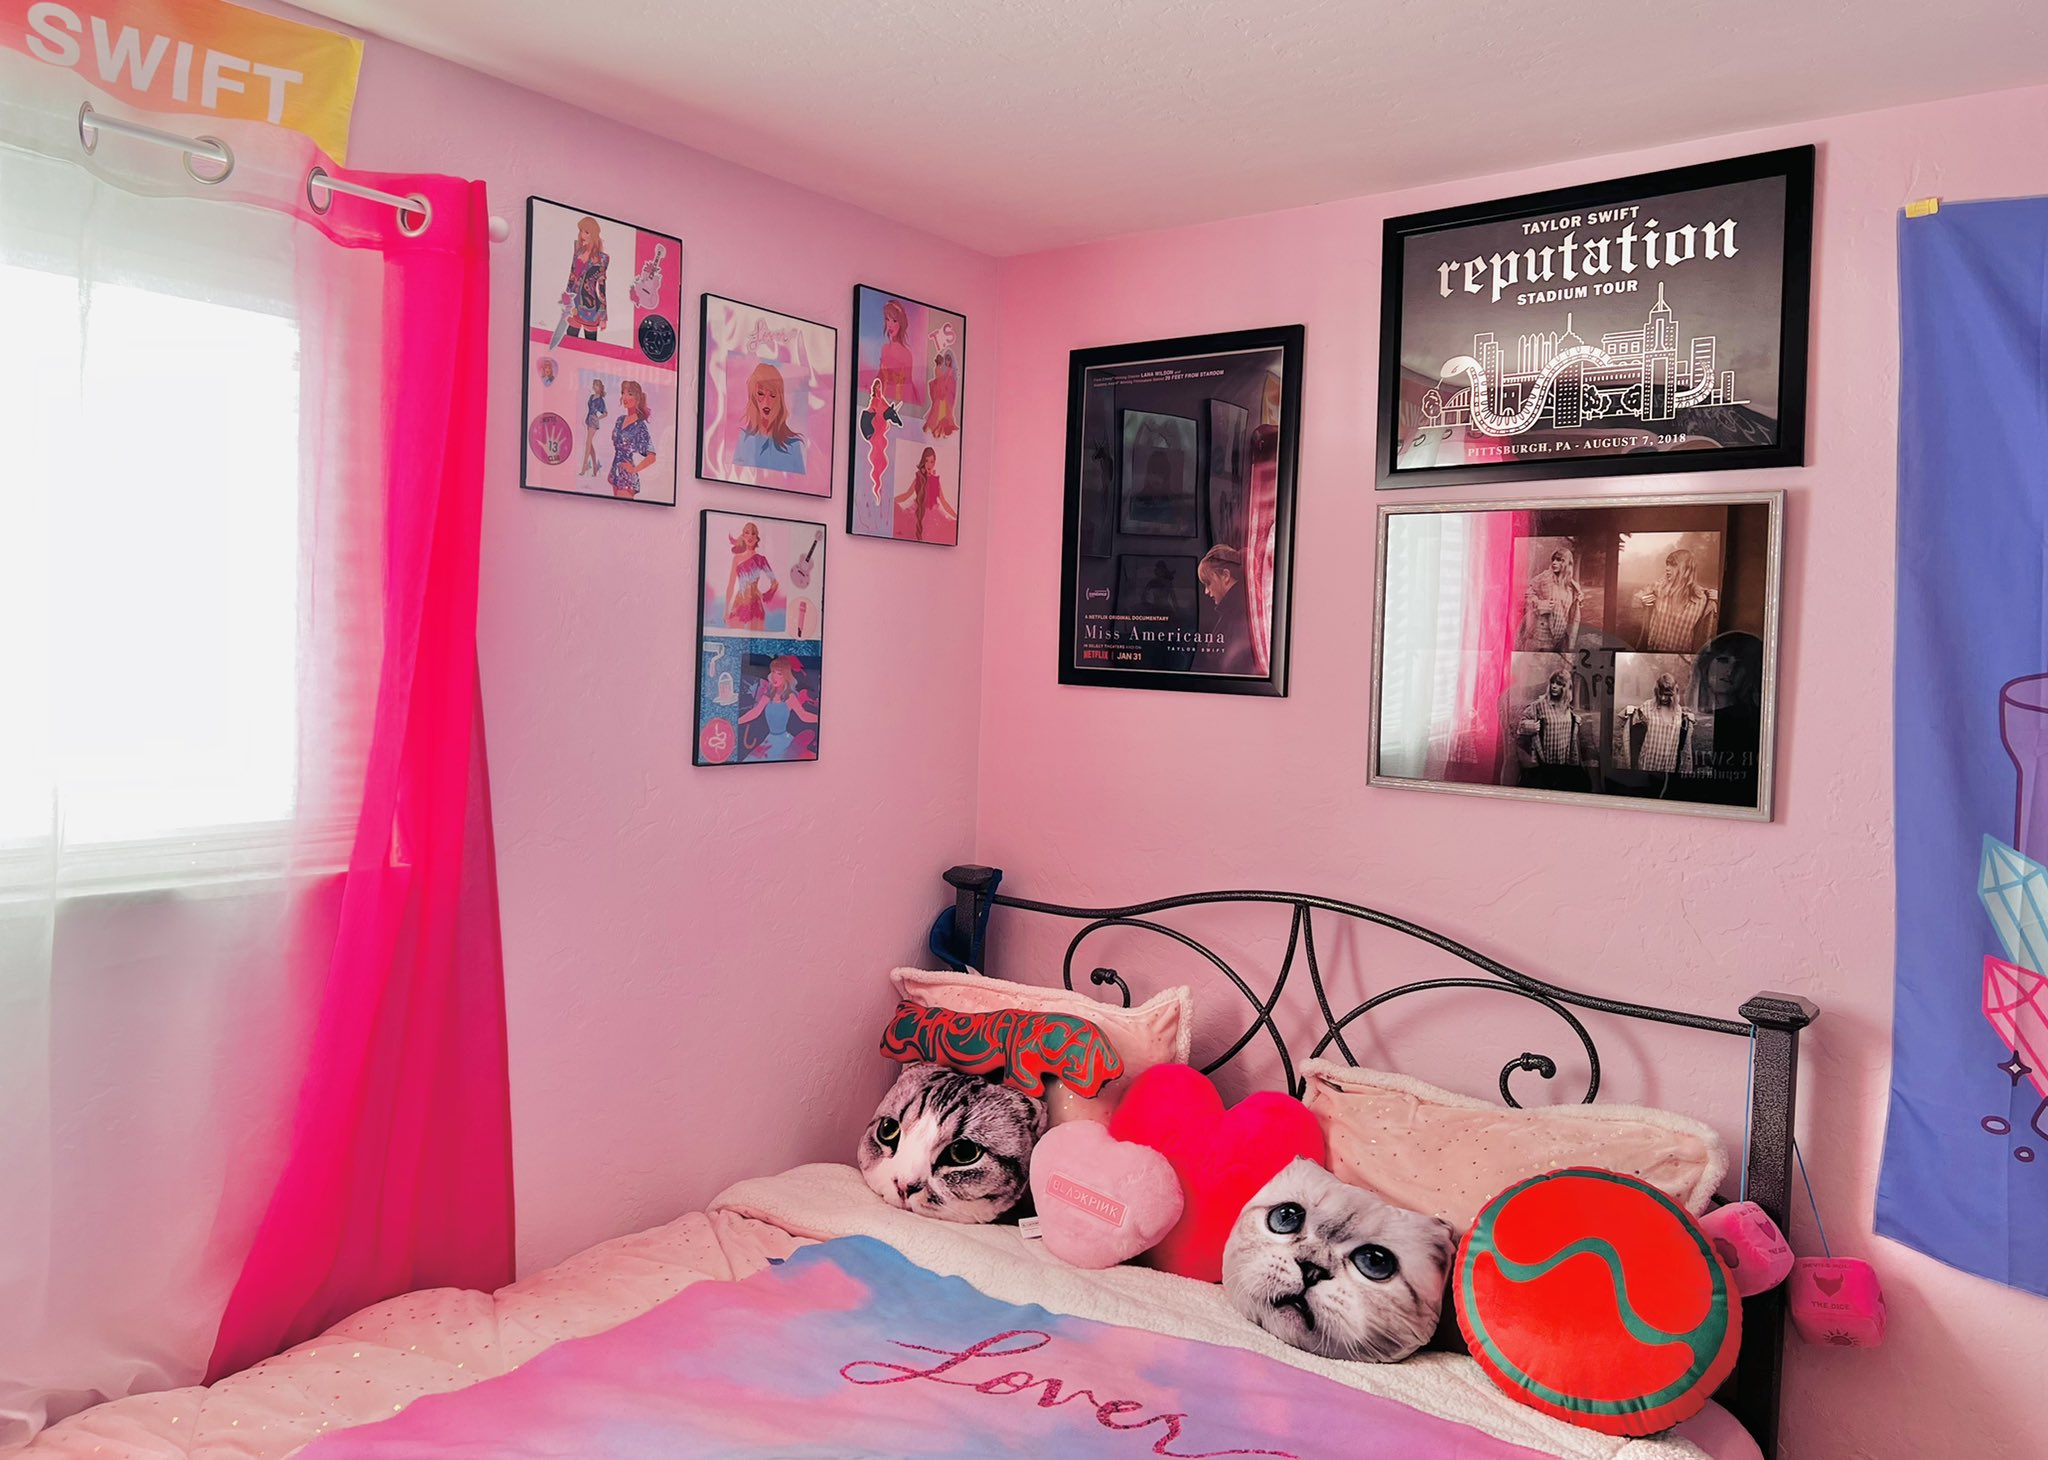 taylor swift themed bedrooms - Google Search  Taylor, Taylor swift, Taylor  swift pictures